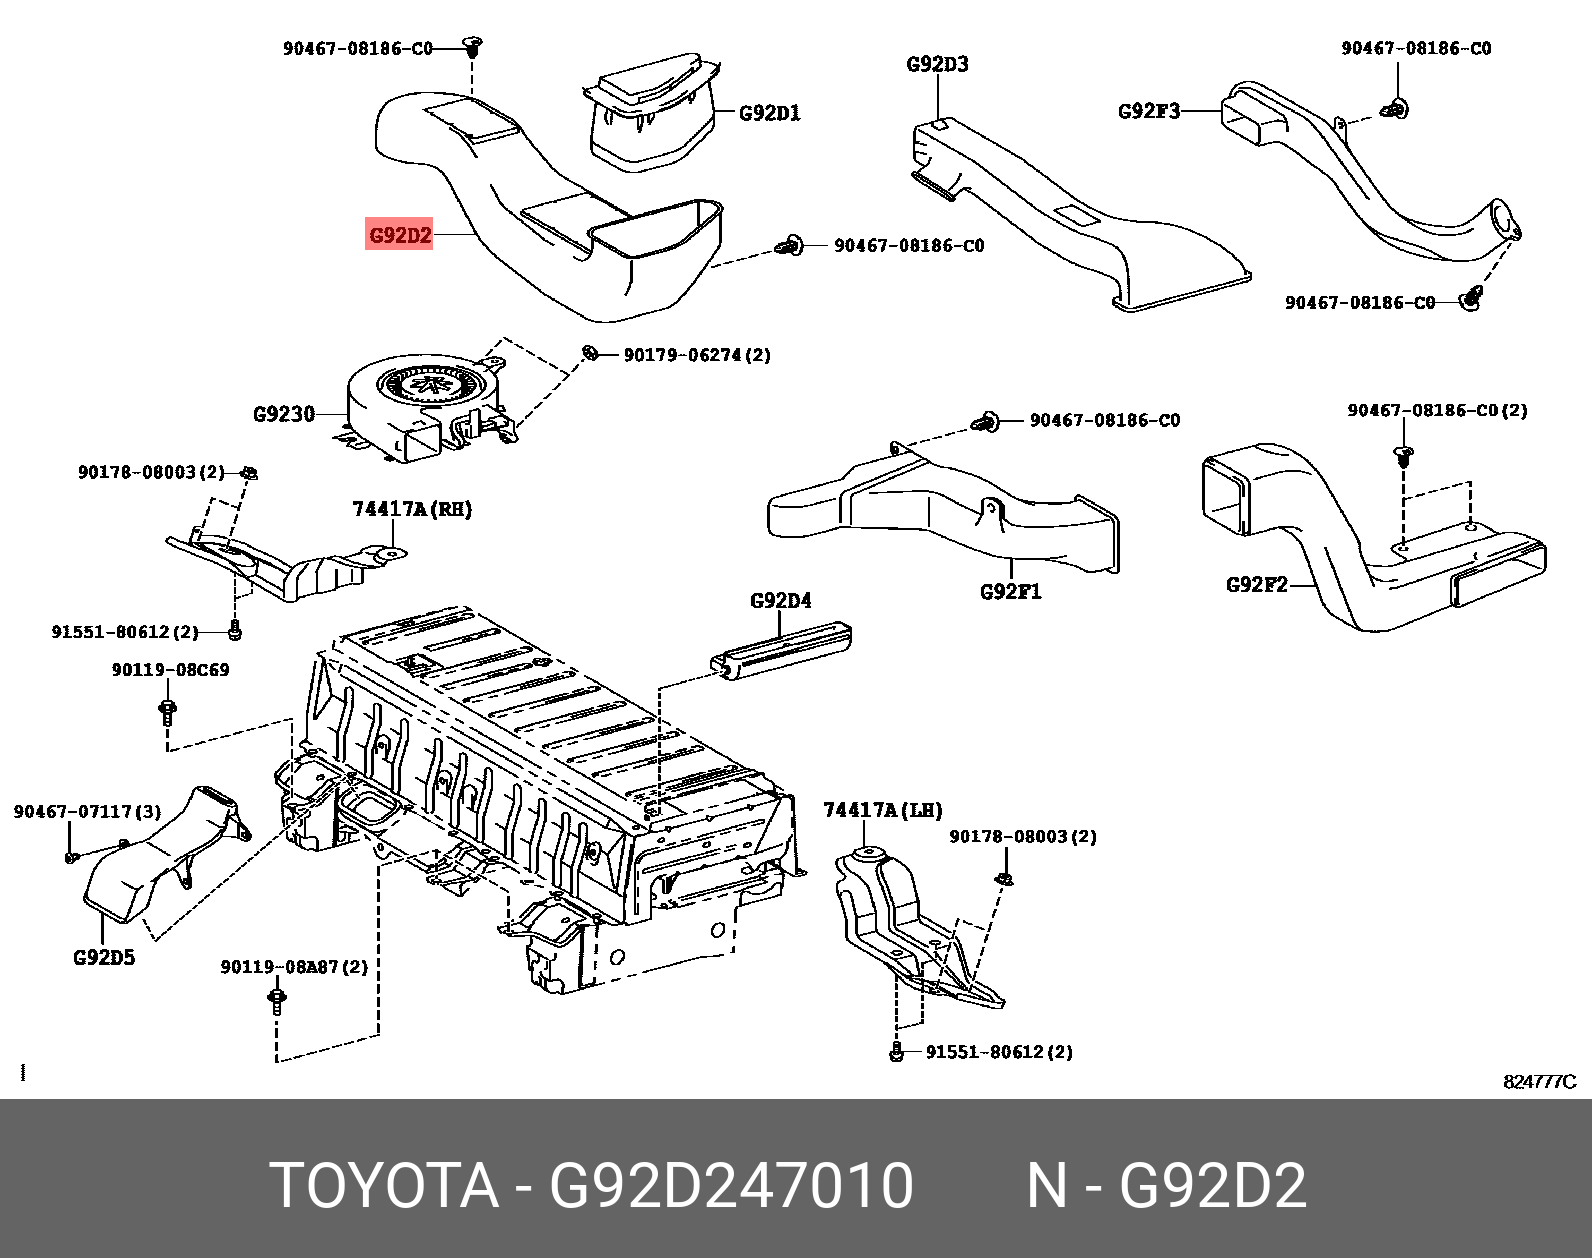 PRIUS (PLUG-IN HBD) 201201 - 201604, DUCT, HYBRID BATTERY INTAKE, NO.2